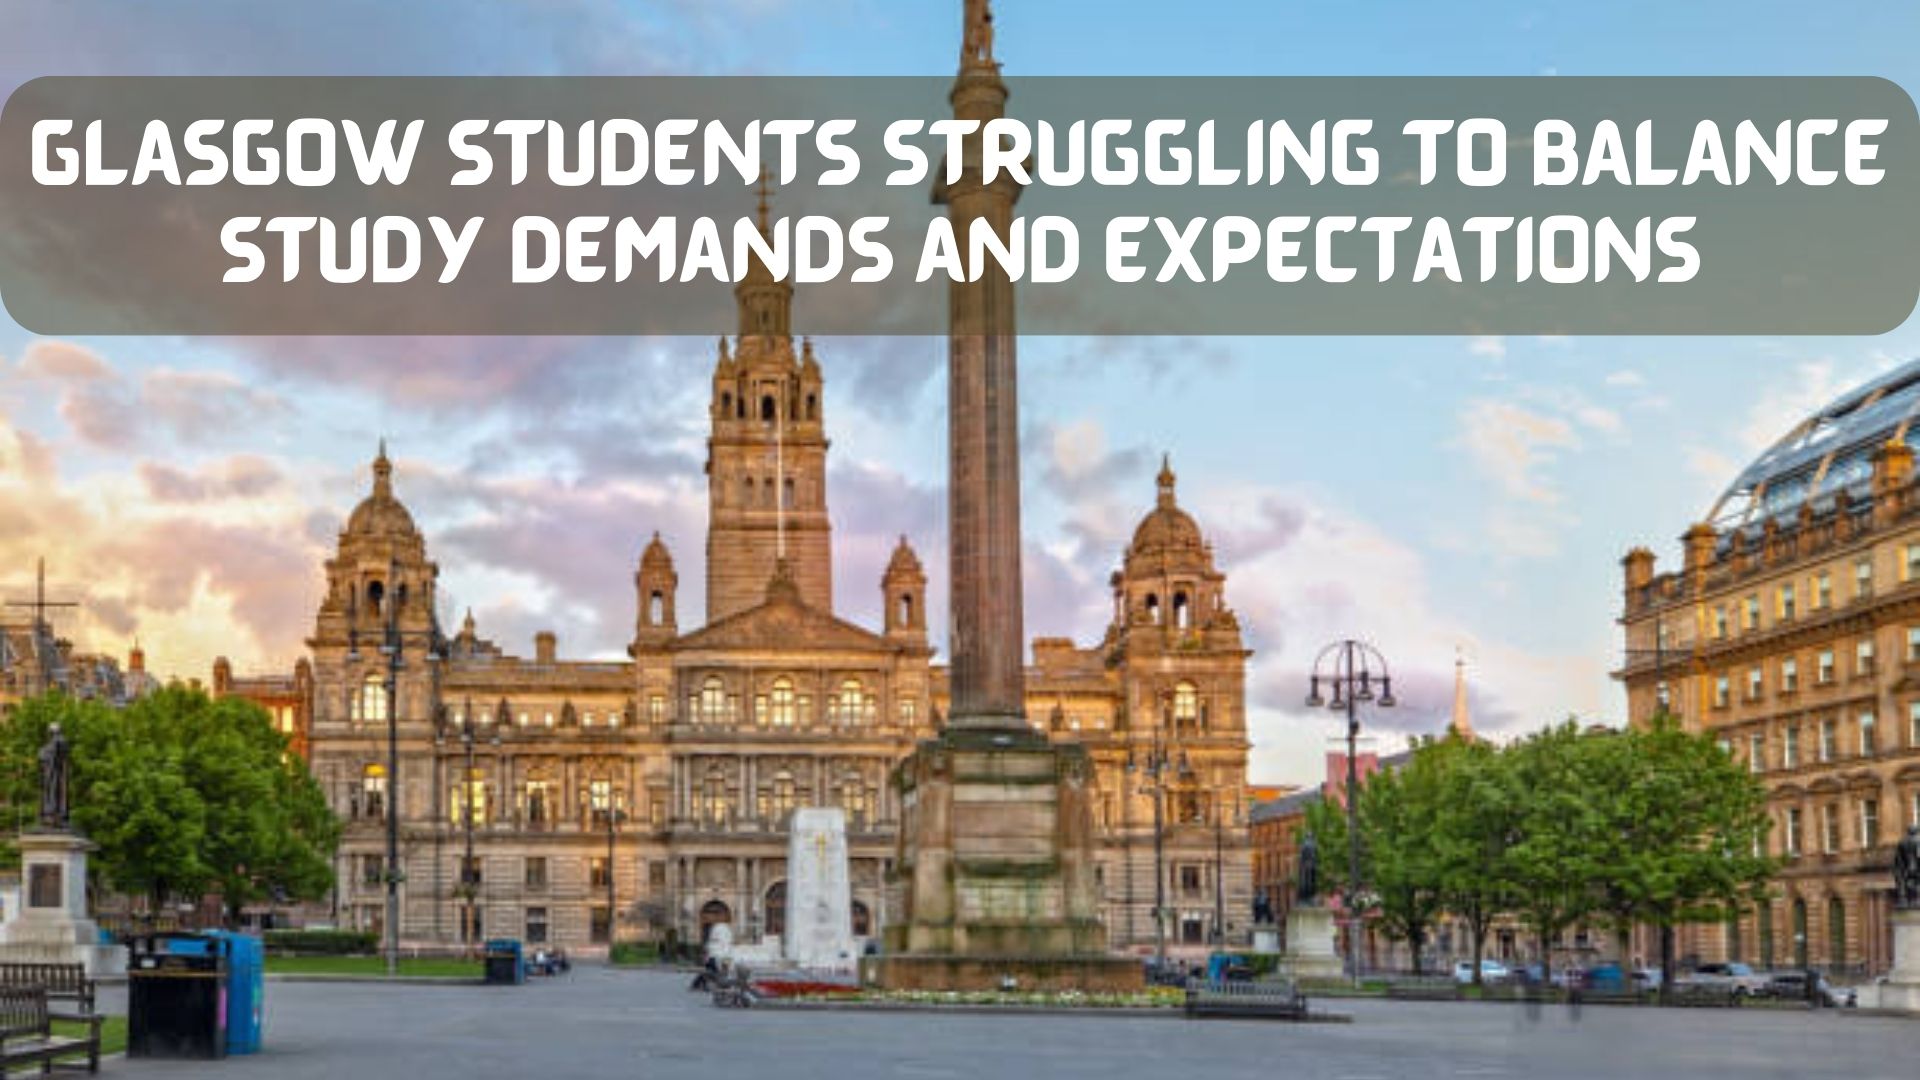 Glasgow Students Struggling to Balance Study Demands and Expectations